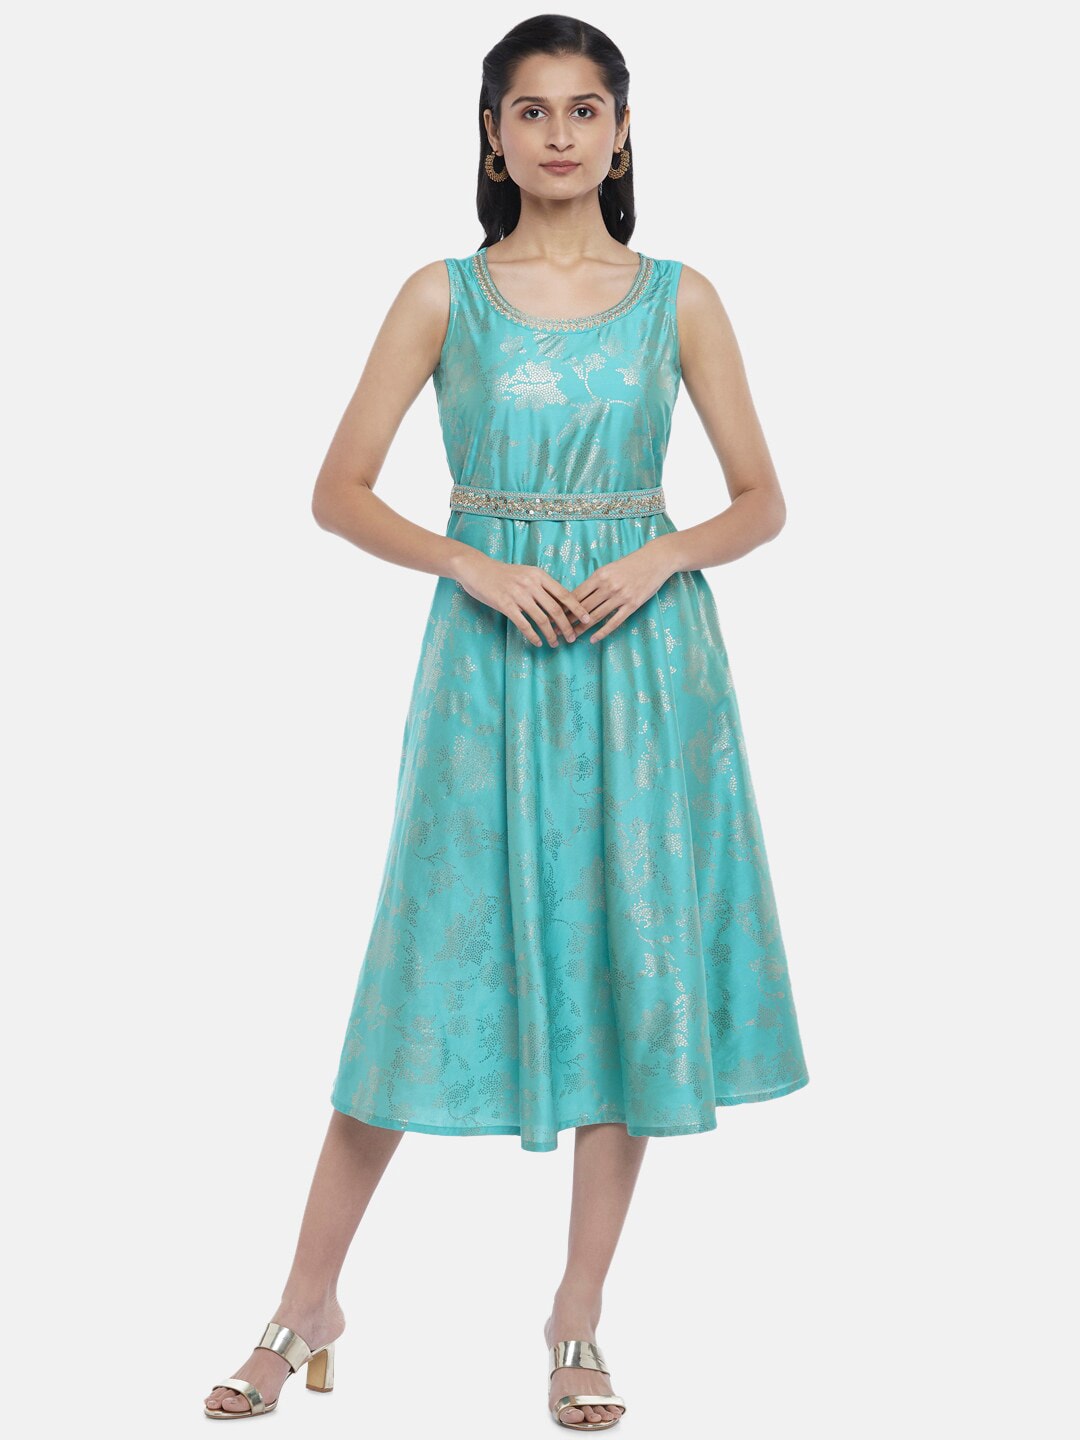 AKKRITI BY PANTALOONS Turquoise Blue Ethnic Motifs Sequined Crepe Belted Ethnic Midi Dress Price in India